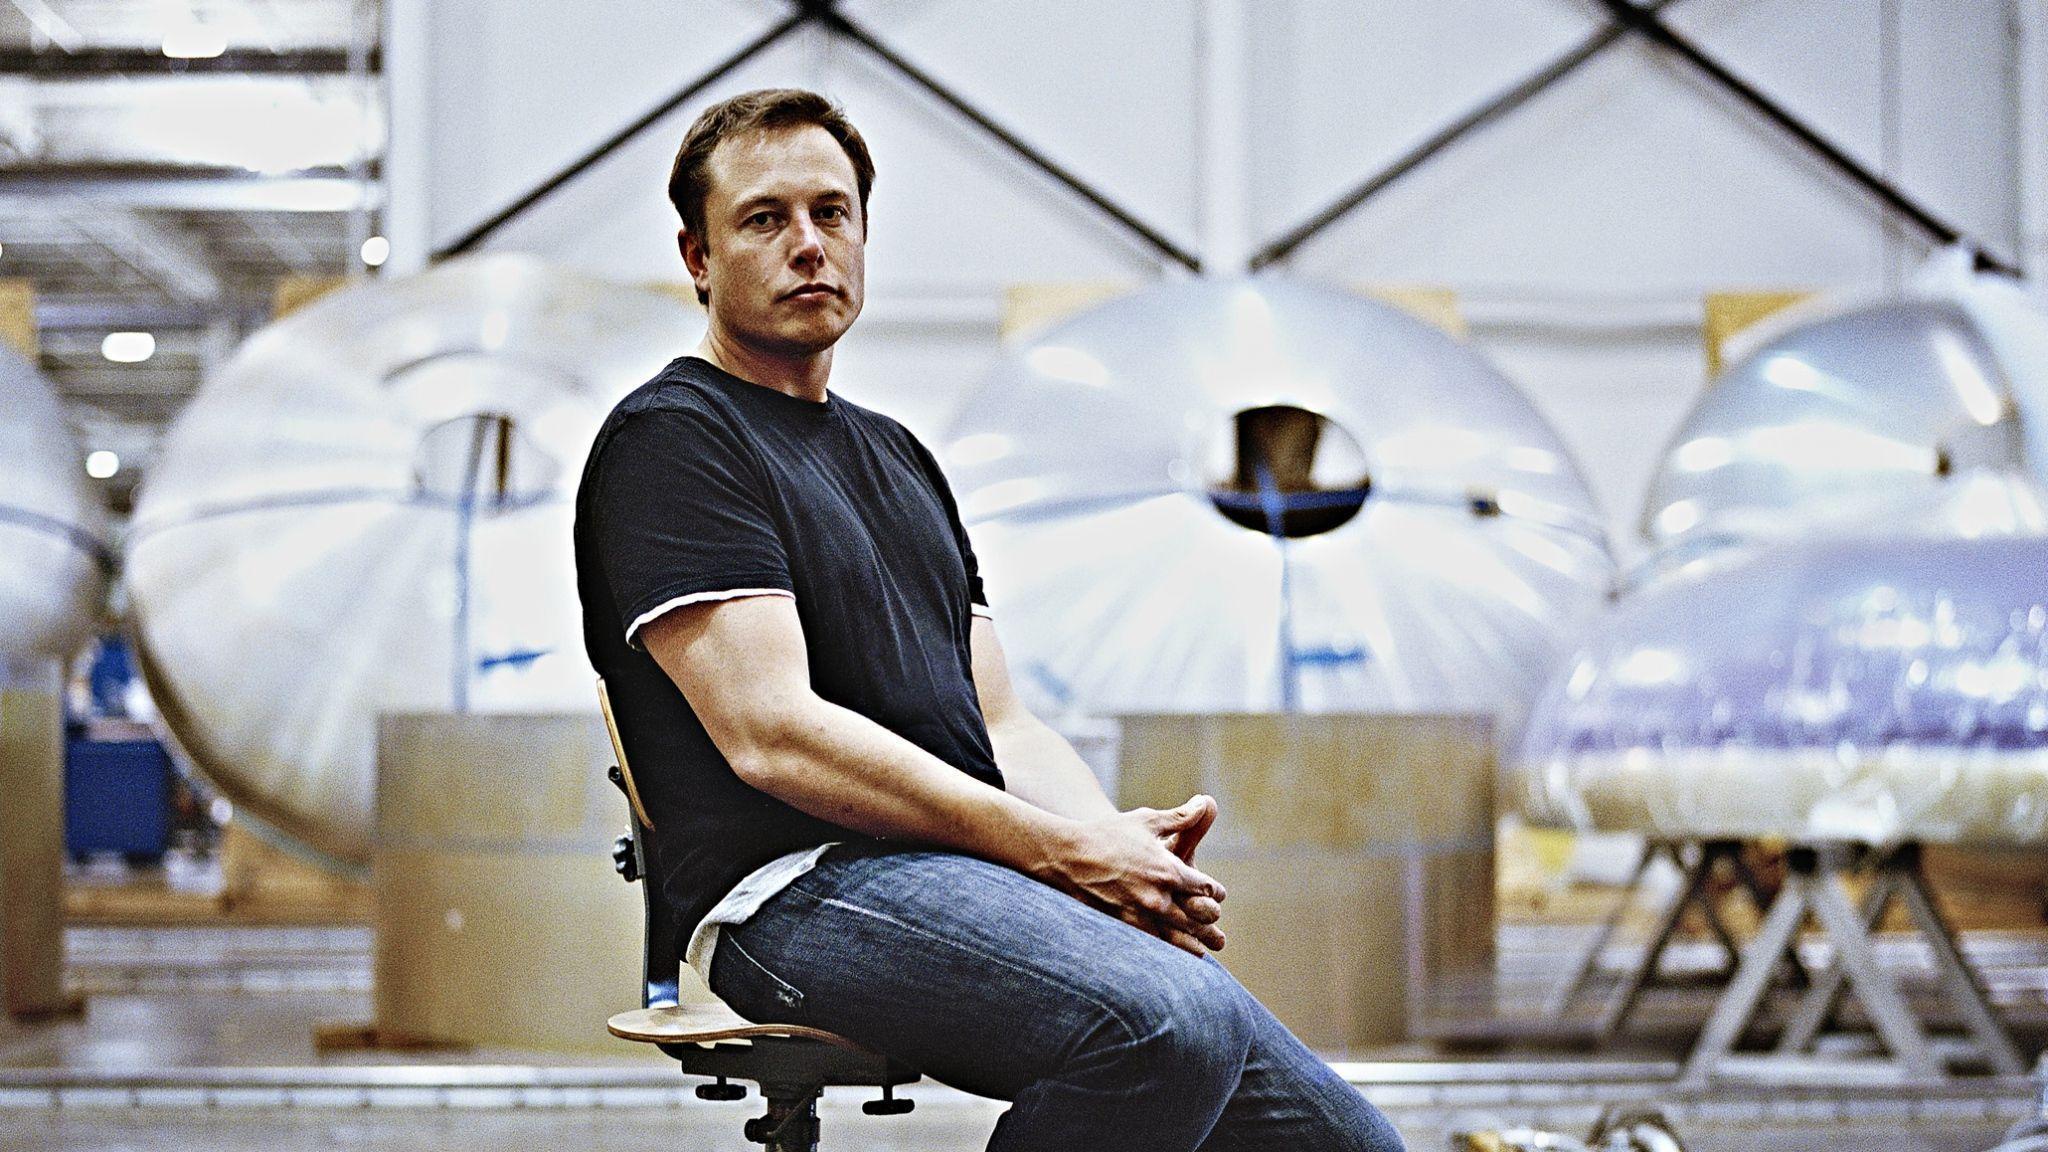 Elon Musk Wallpaper High Resolution and Quality Download